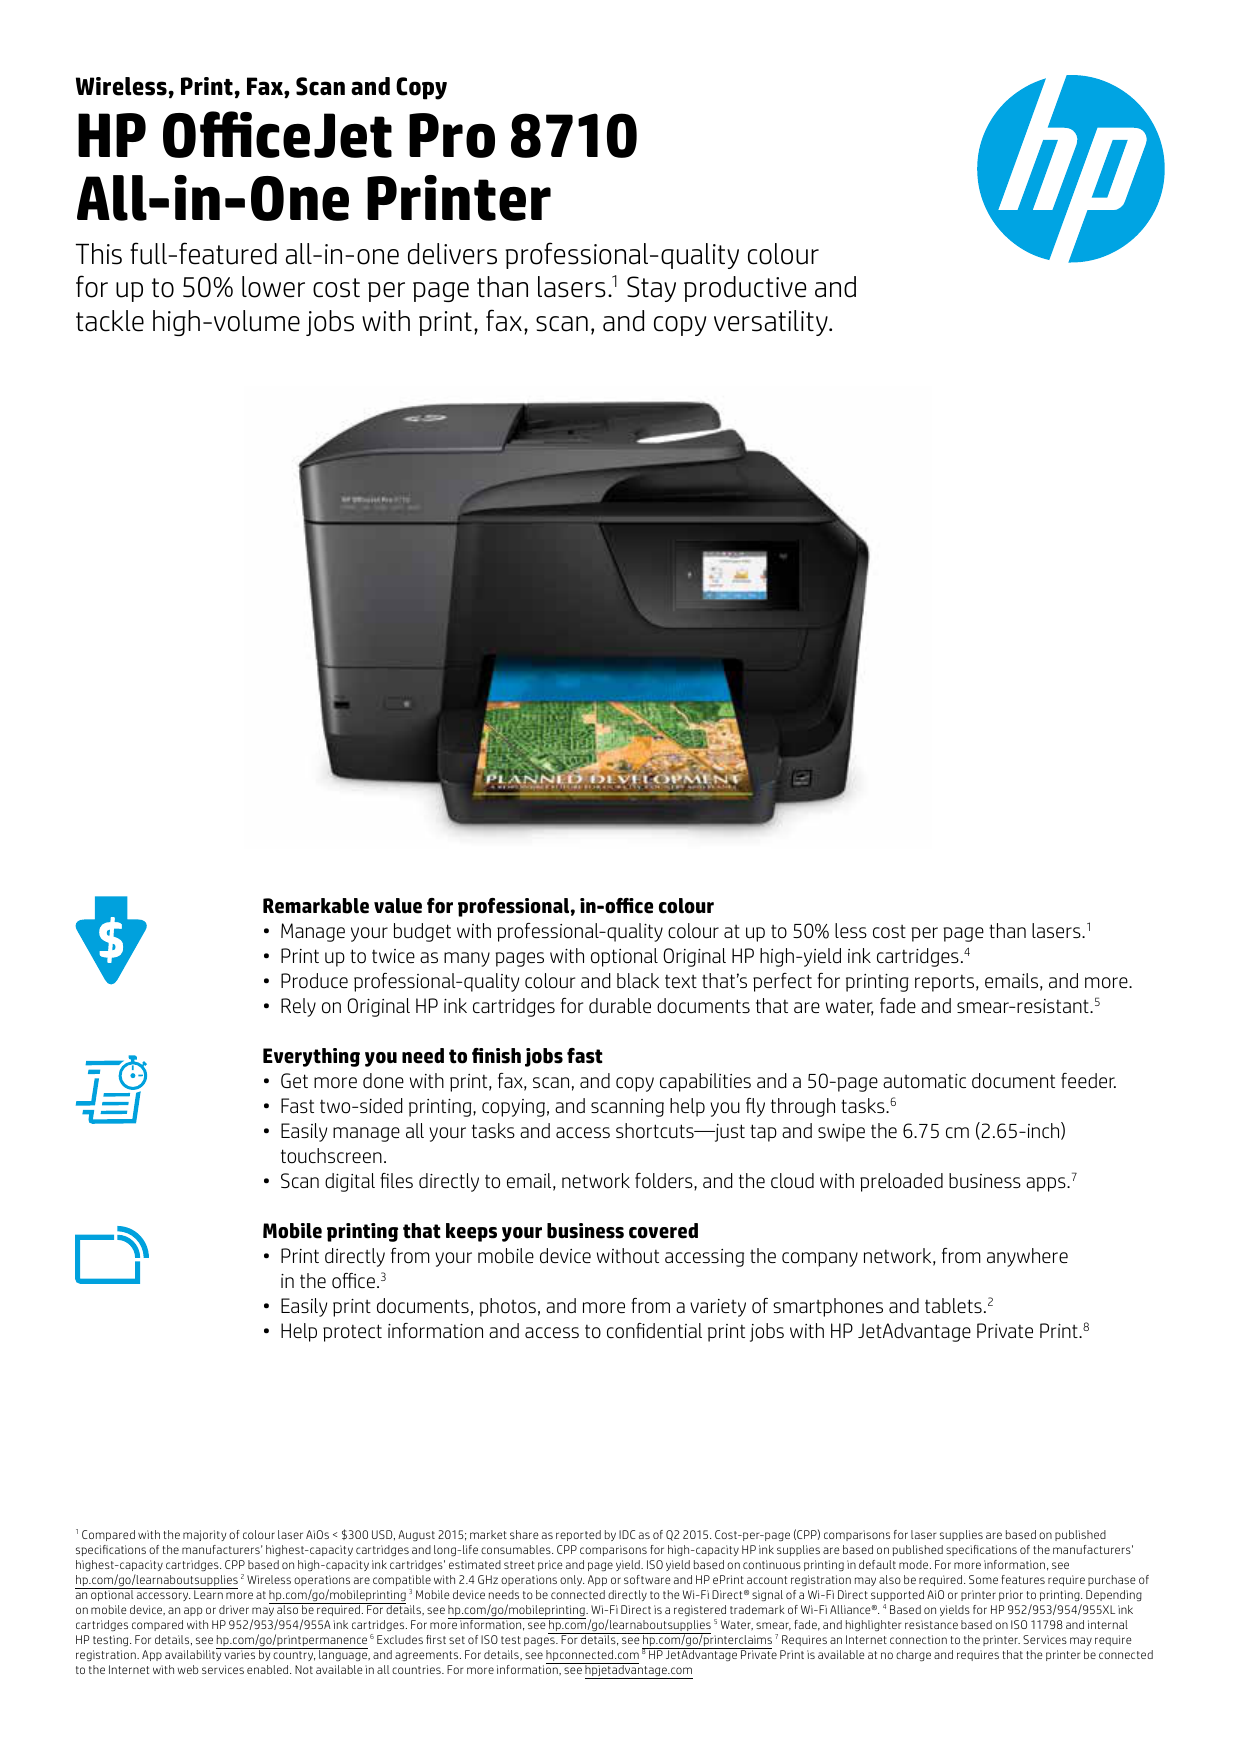 hp officejet pro 8710 scanning driver for mac